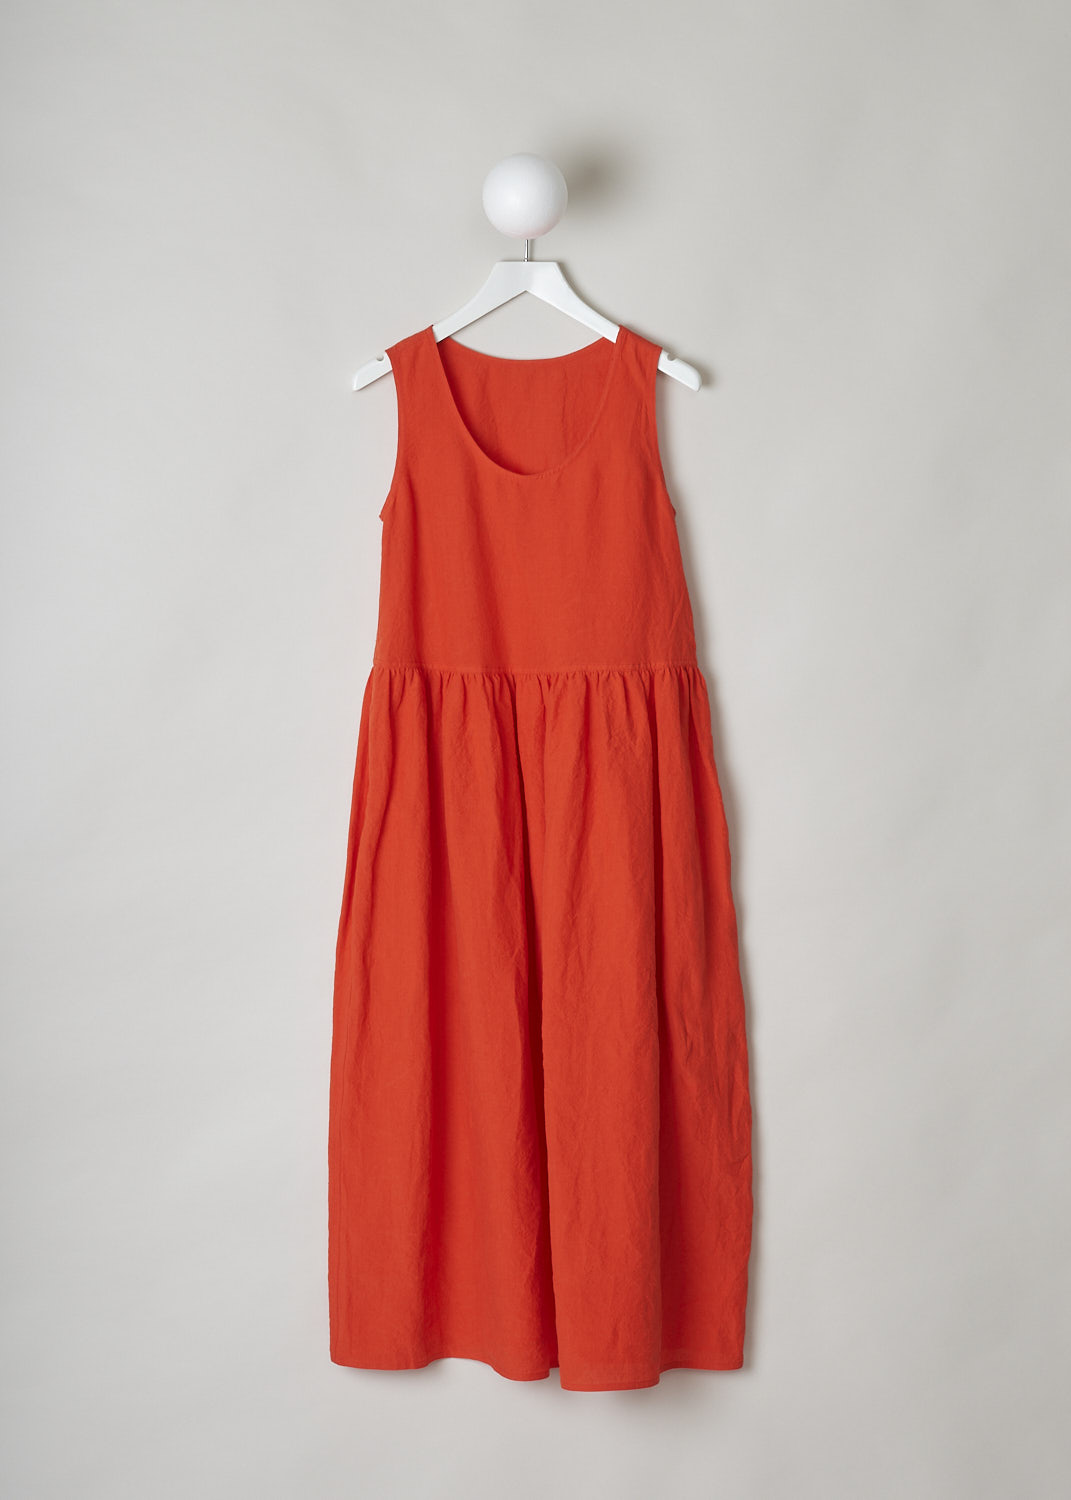 SOFIE D’HOORE, BRIGHT RED LINEN DRESS, DANDLE_LIFE_RED_PEPPER, Red, Front, This bright red sleeveless dress has U-neckline. The dress has a wide A-line silhouette. A straight crystal pleated hemline separates the bodice from the midi length skirt. Concealed slanted pockets can be found in the side seam. 
